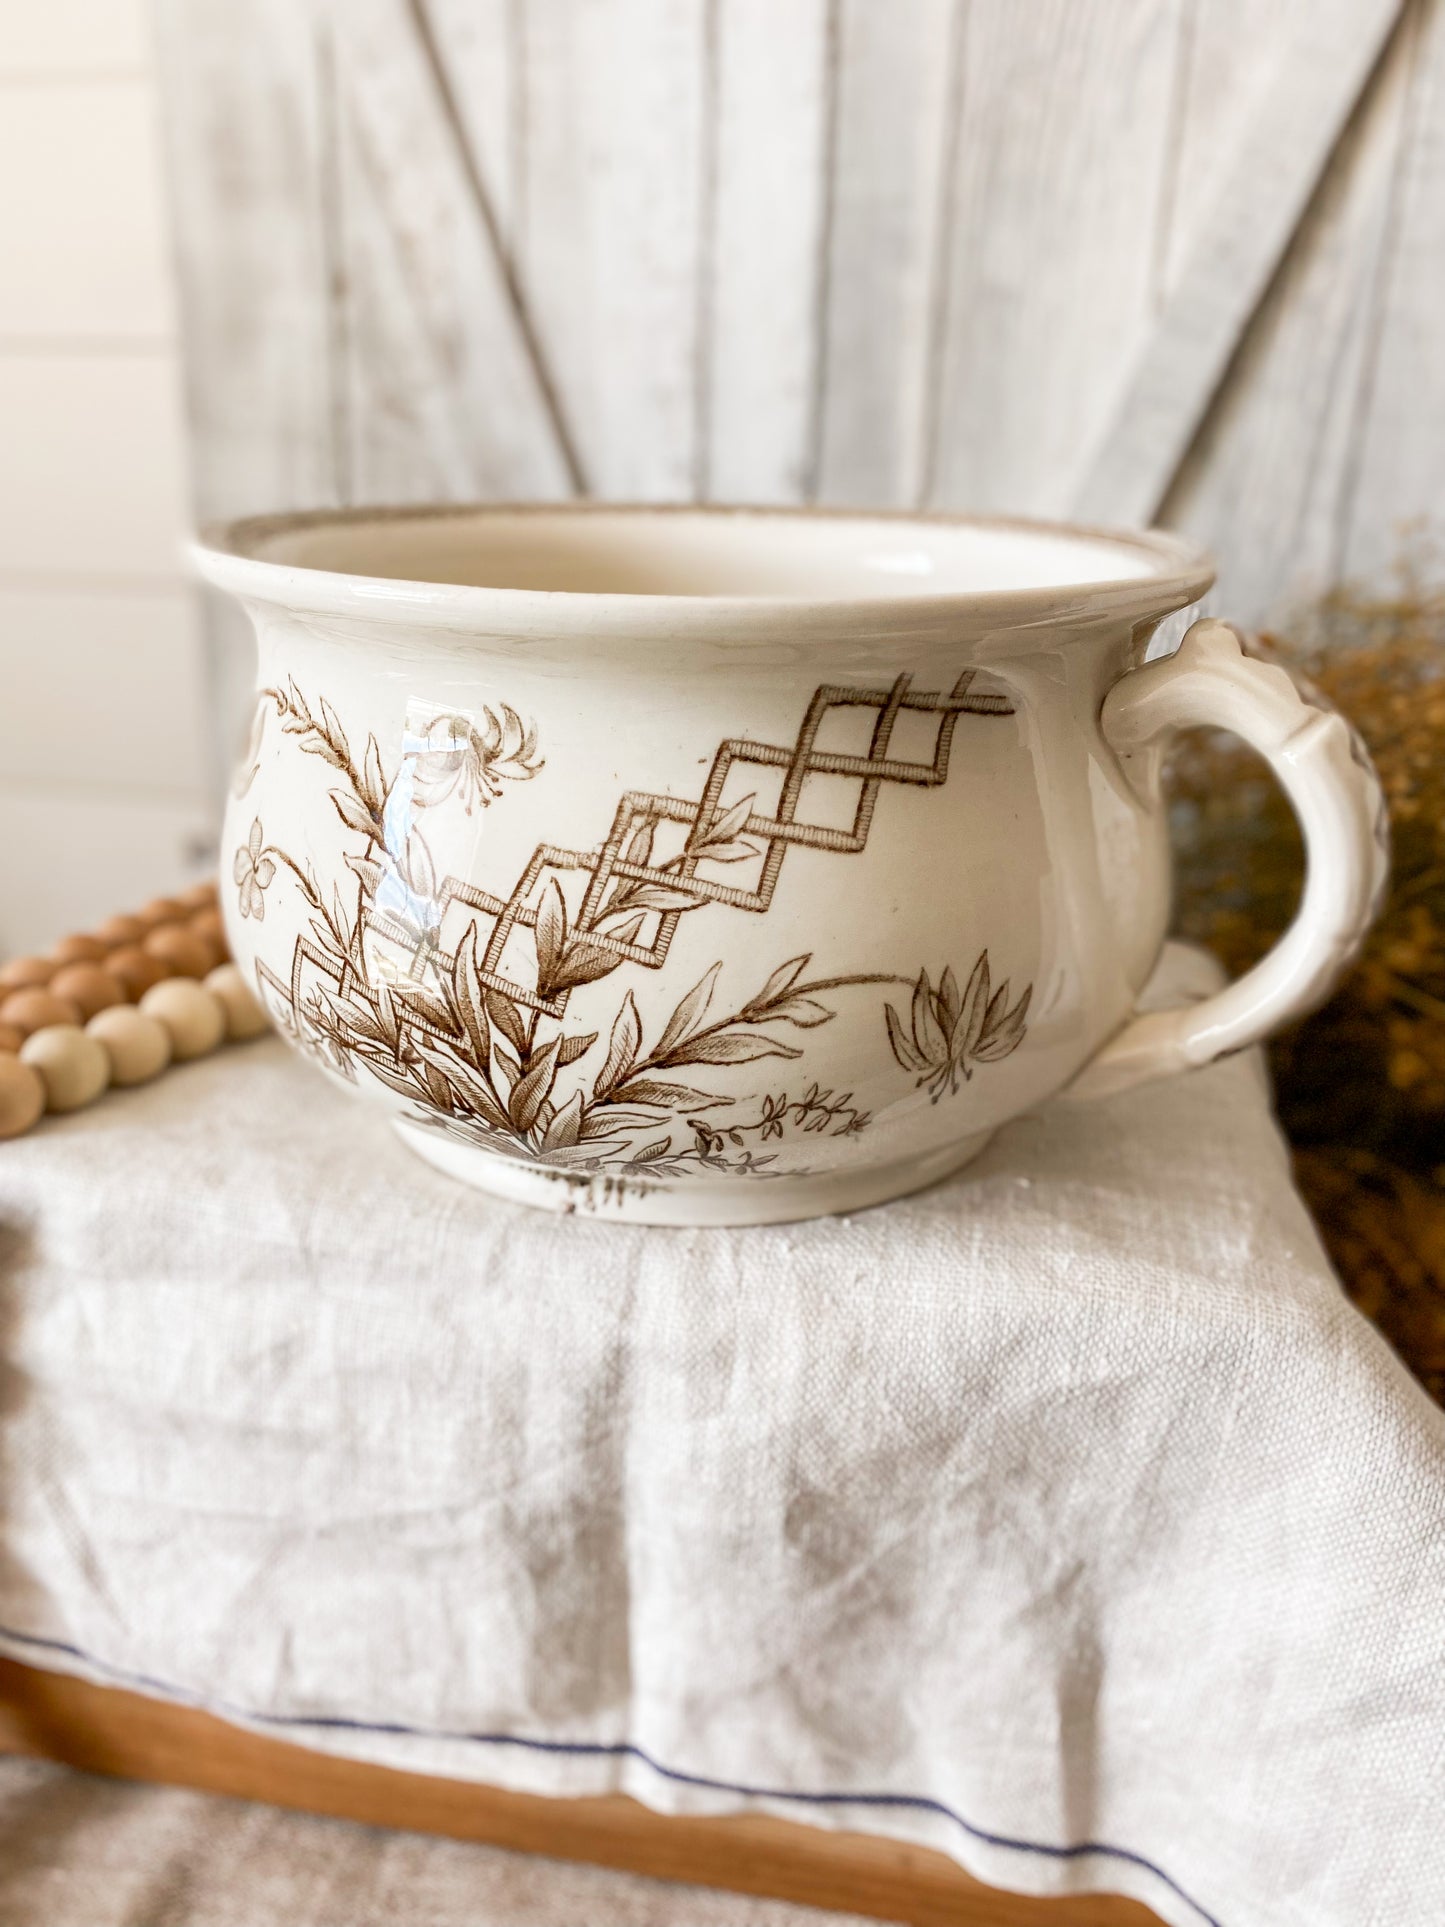 Antique Ironstone Chamber Pot with Brown Transferware by GW Turner & Sons, c1880